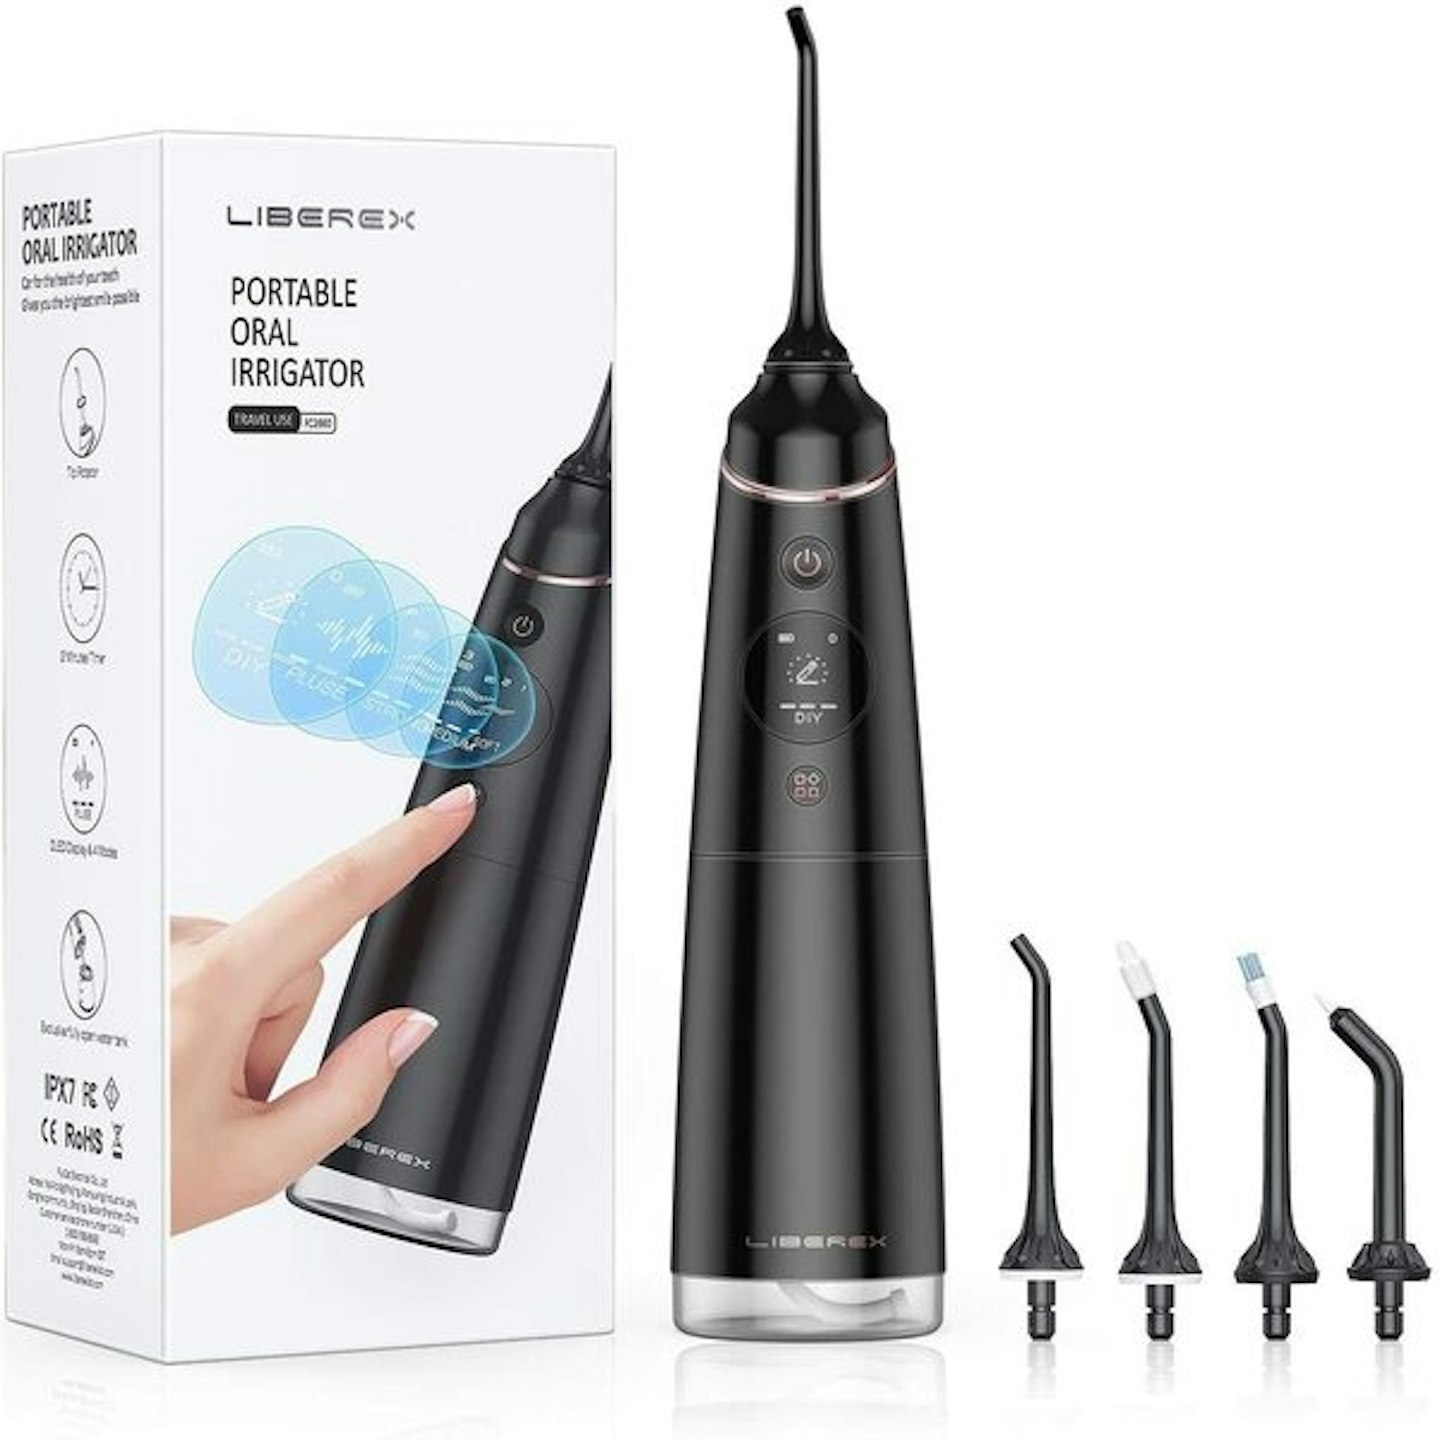 Fairywill water flosser